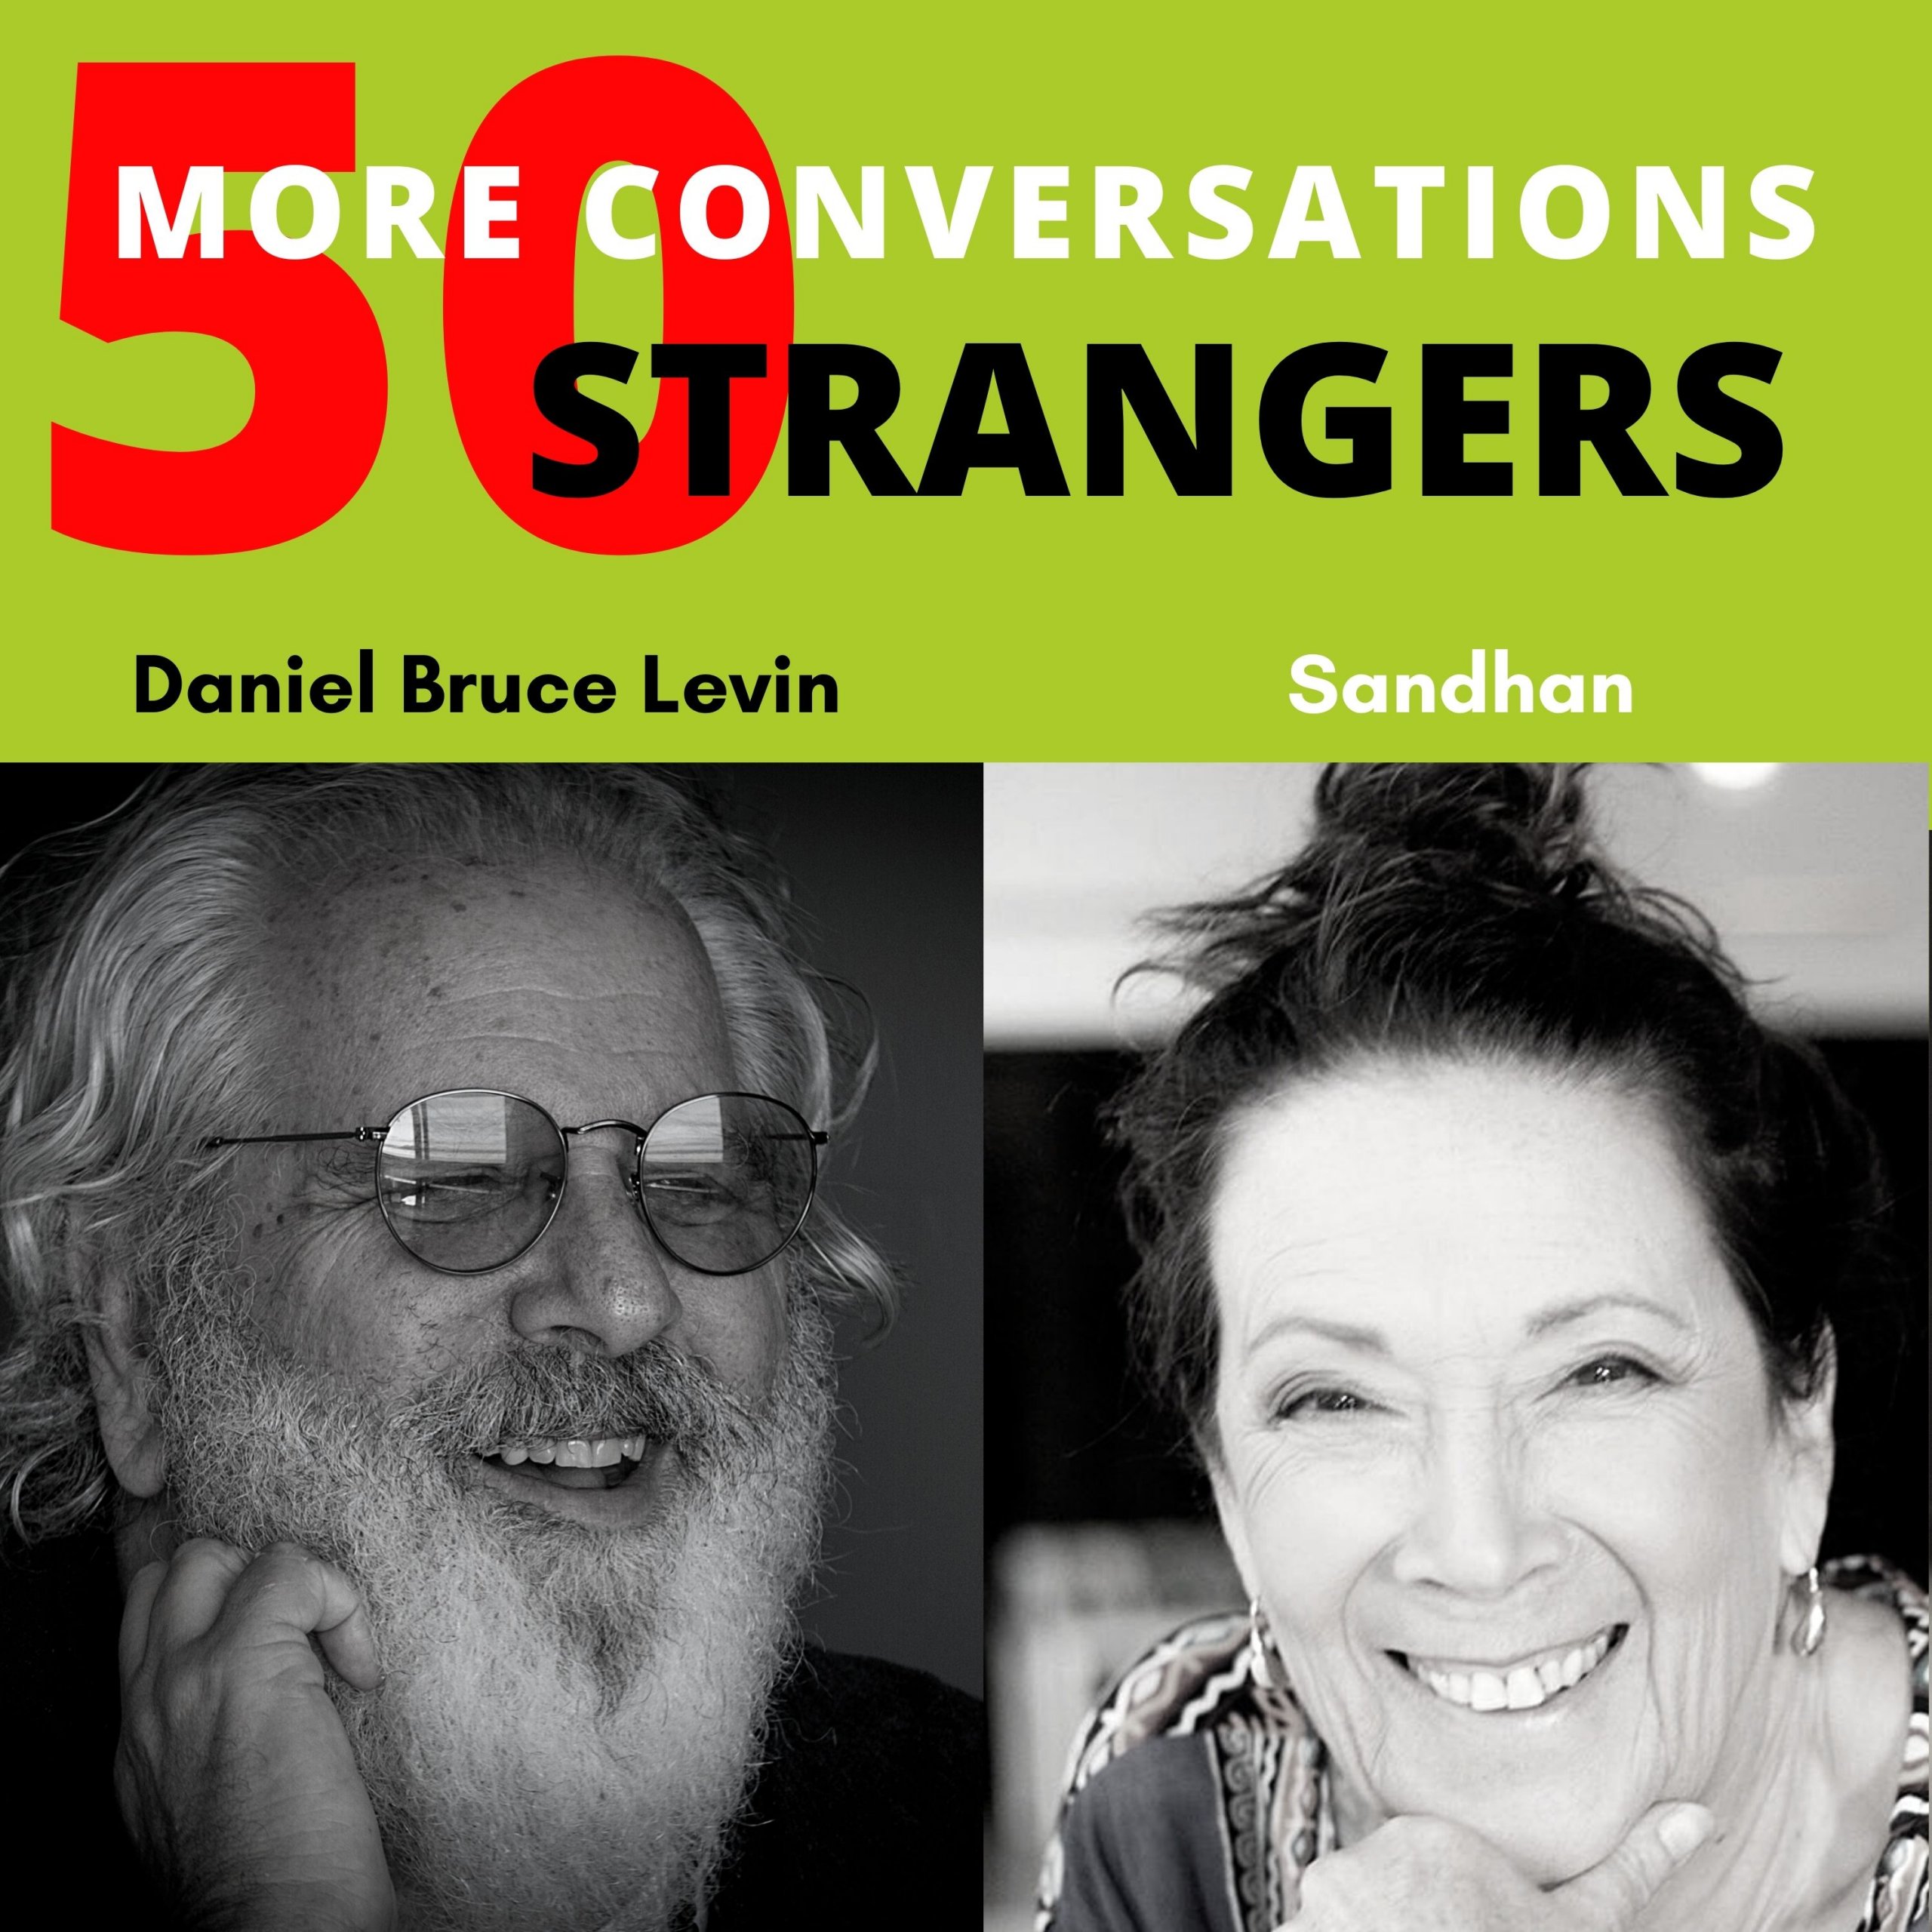 50 More Conversations with 50 More Strangers with Sandhan